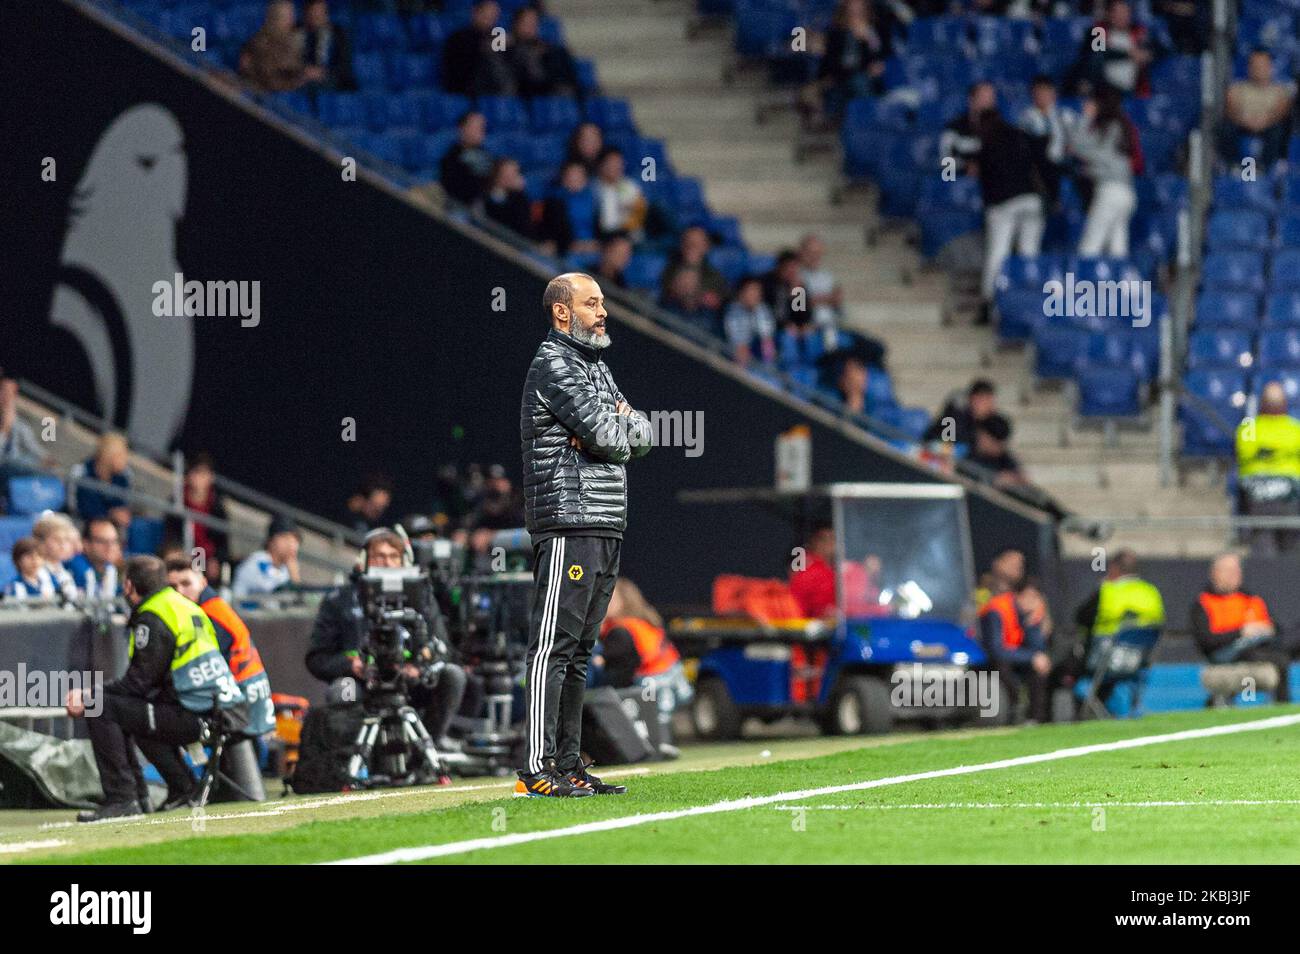 Nuno Espirito Santo during the match between RCD Espanyol and Wolverhampton Wanderers FC, corresponding to the second leg of the round of 32 of the Europa League, played at the RCDE Stadium, on 27th February 2020, in Barcelona, Spain. (Photo by Xavier Ballart/Urbanandsport/NurPhoto) Stock Photo